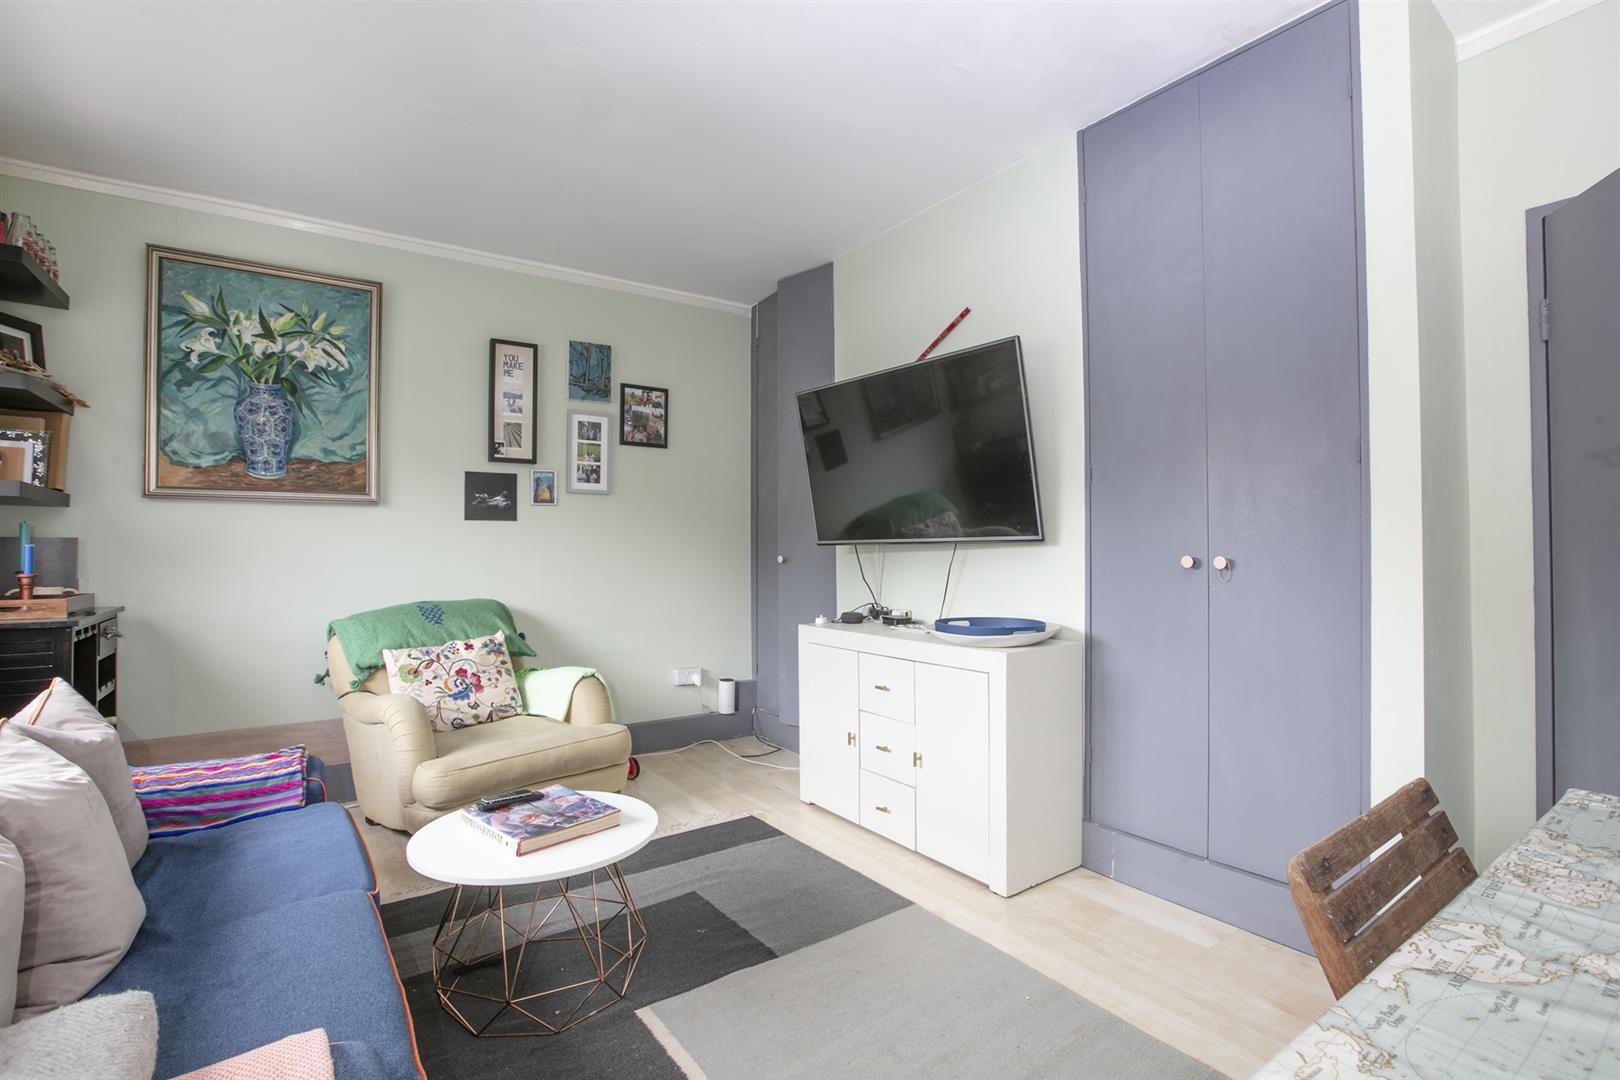 Flat - Purpose Built For Sale in Bonsor Street, Camberwell, SE5 870 view6